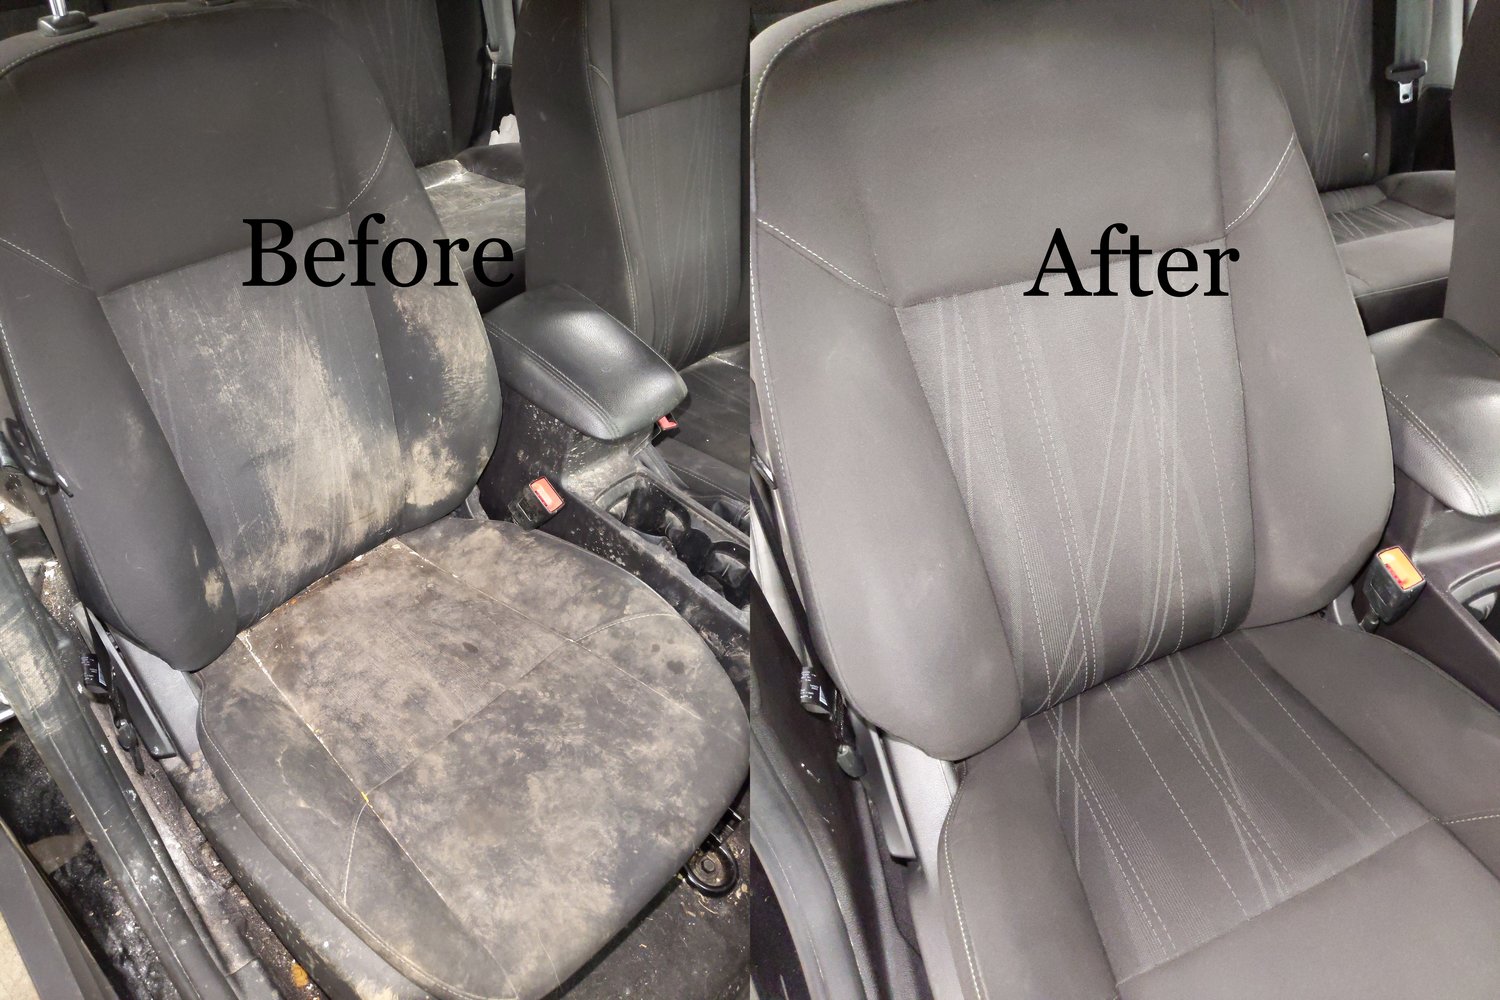 Clean Car Upholstery Remove Stains, How To Remove Old Stains From Cloth Car Seats